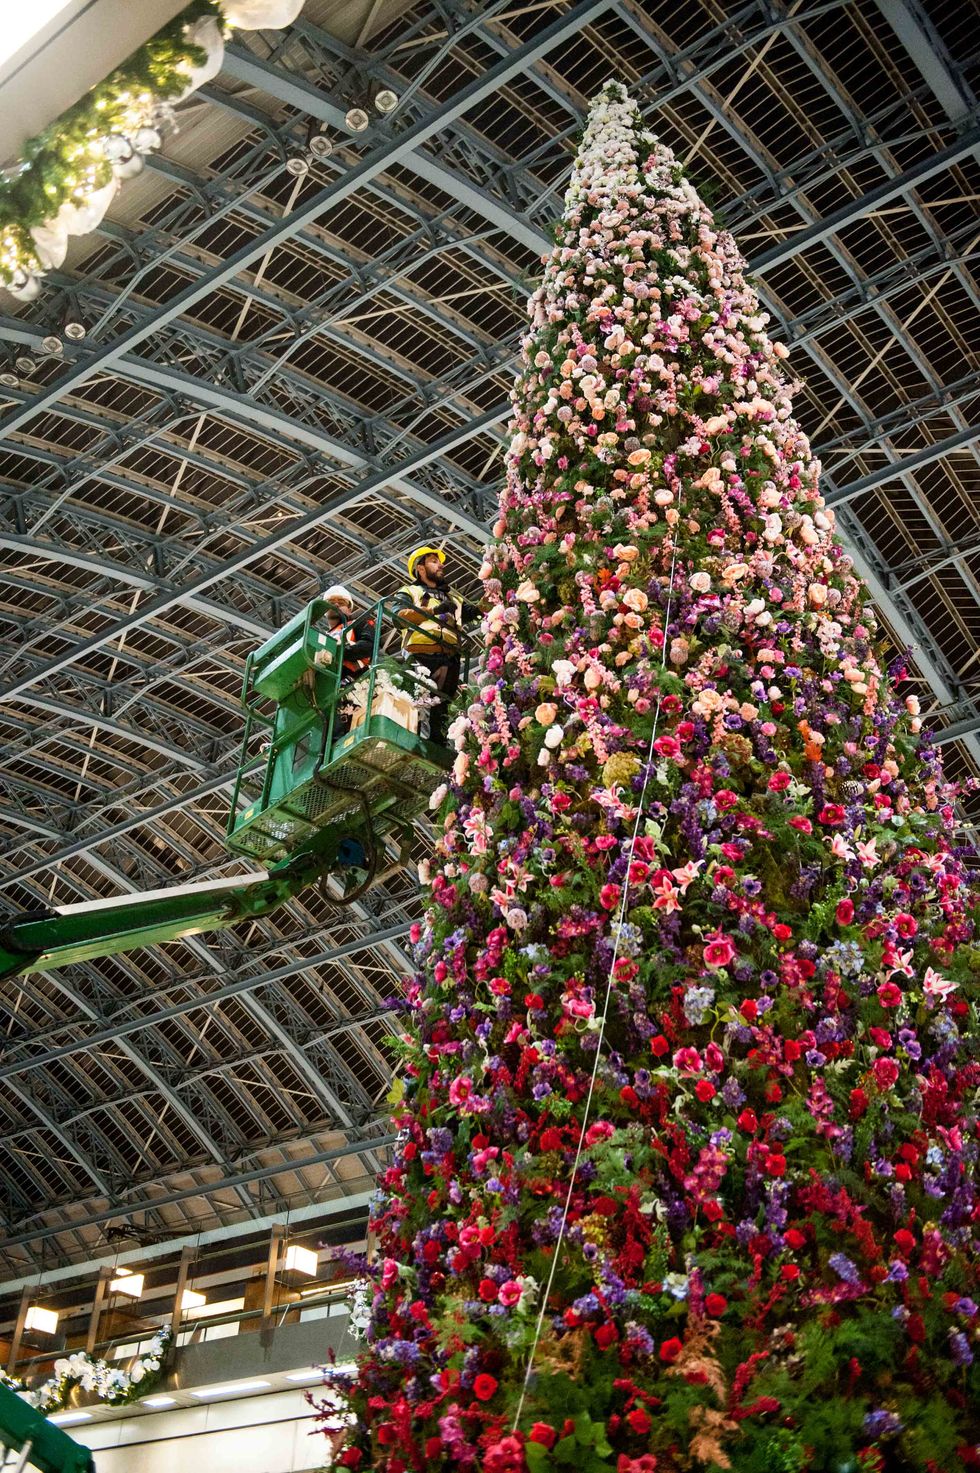 47ft floral Christmas tree unveiled at St Pancras International station, London.